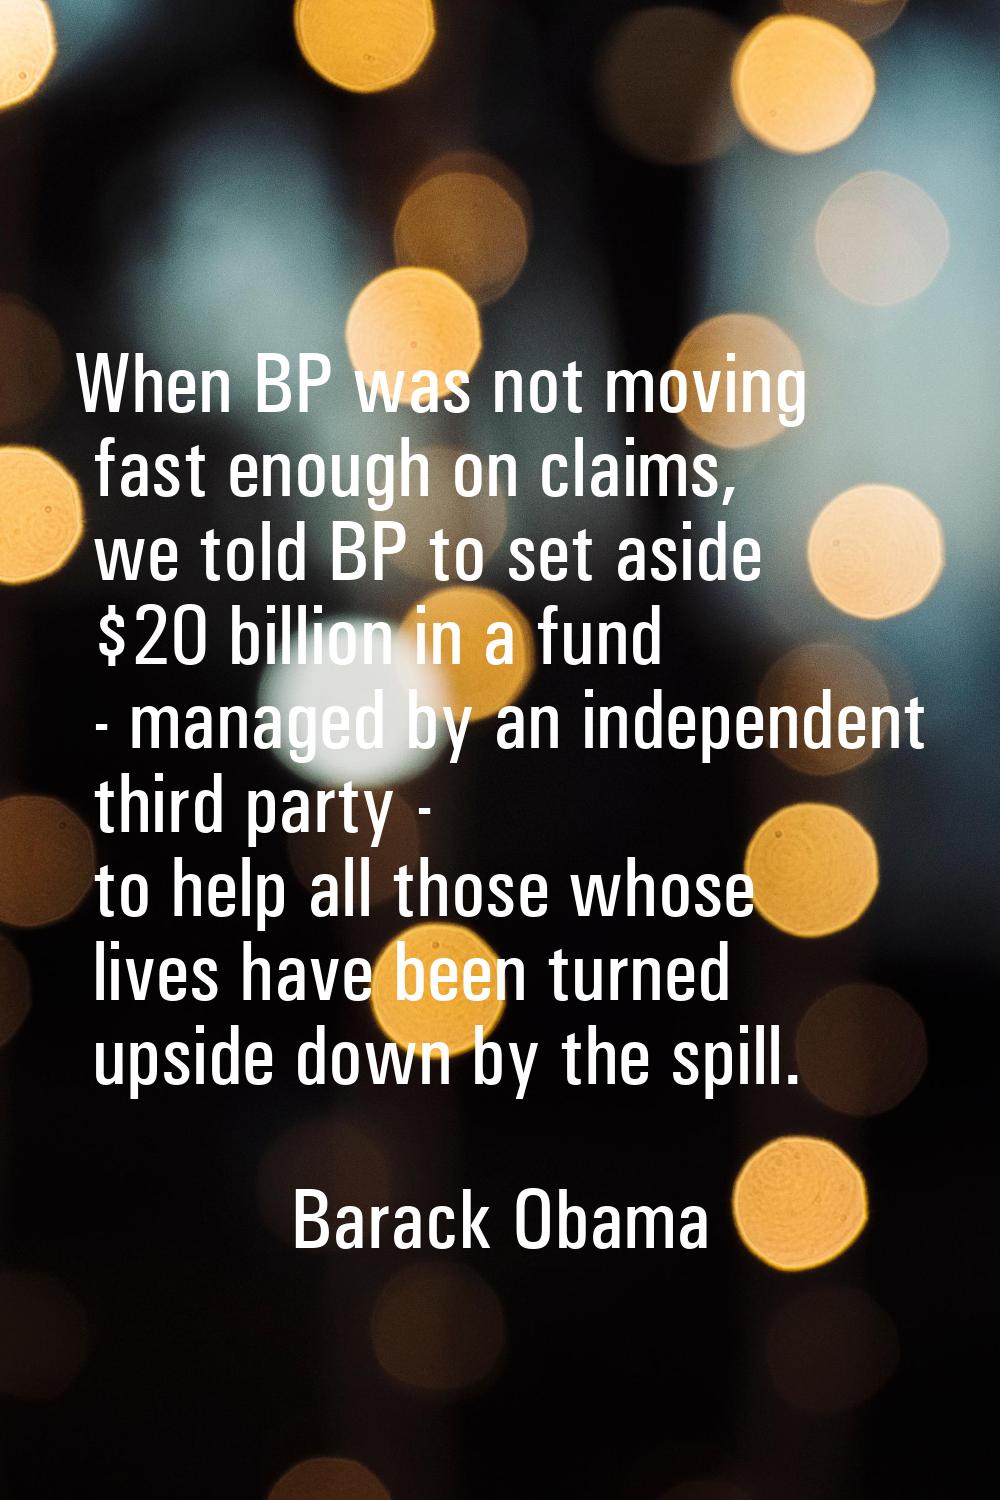 When BP was not moving fast enough on claims, we told BP to set aside $20 billion in a fund - manag